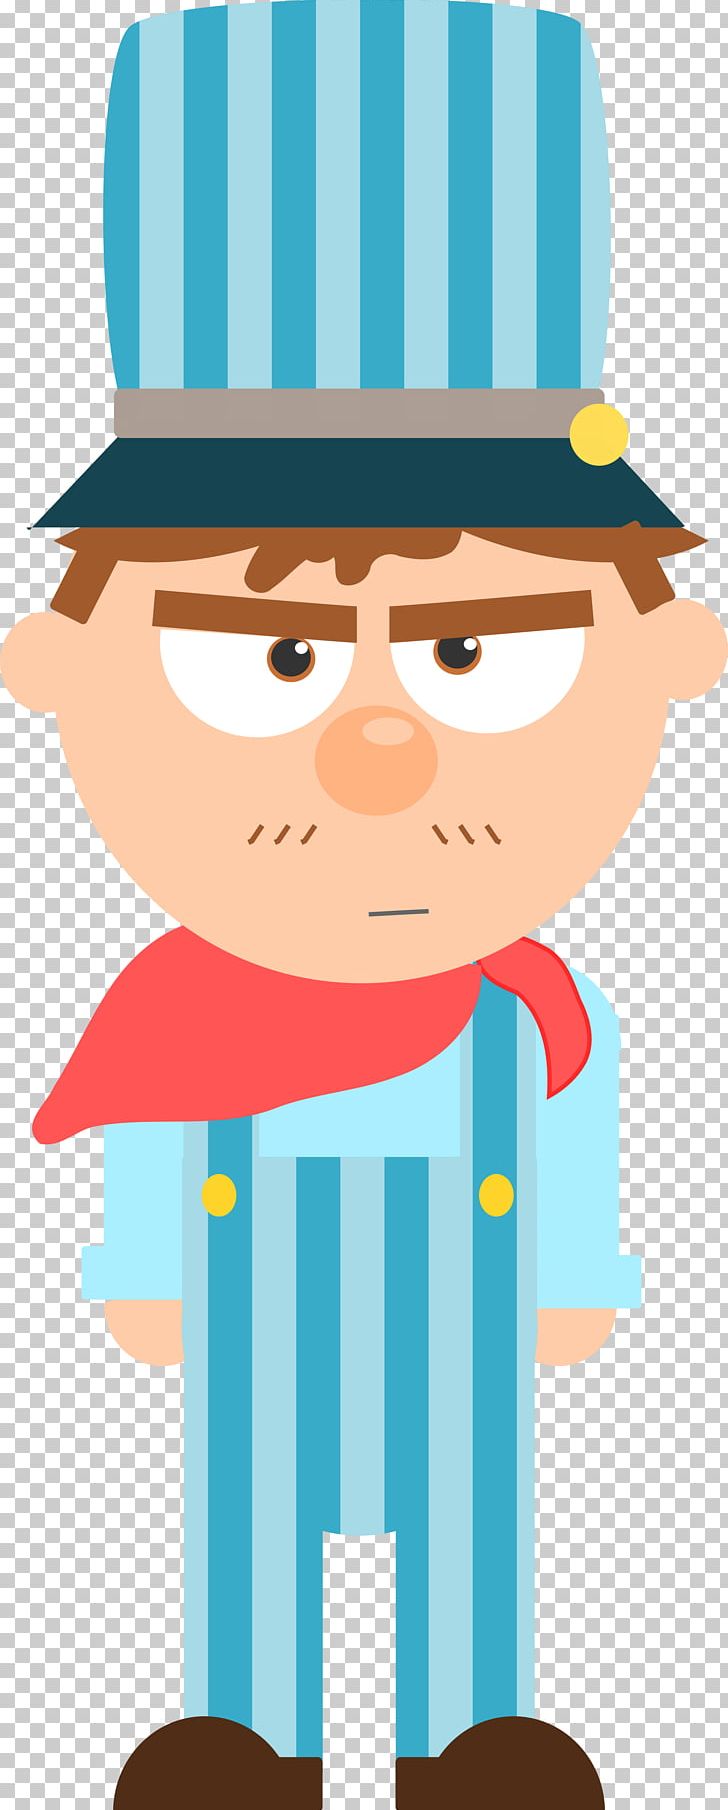 Rail Transport Train Conductor Railroad Engineer PNG, Clipart, Boy, Caboose, Cheek, Driving, Fictional Character Free PNG Download